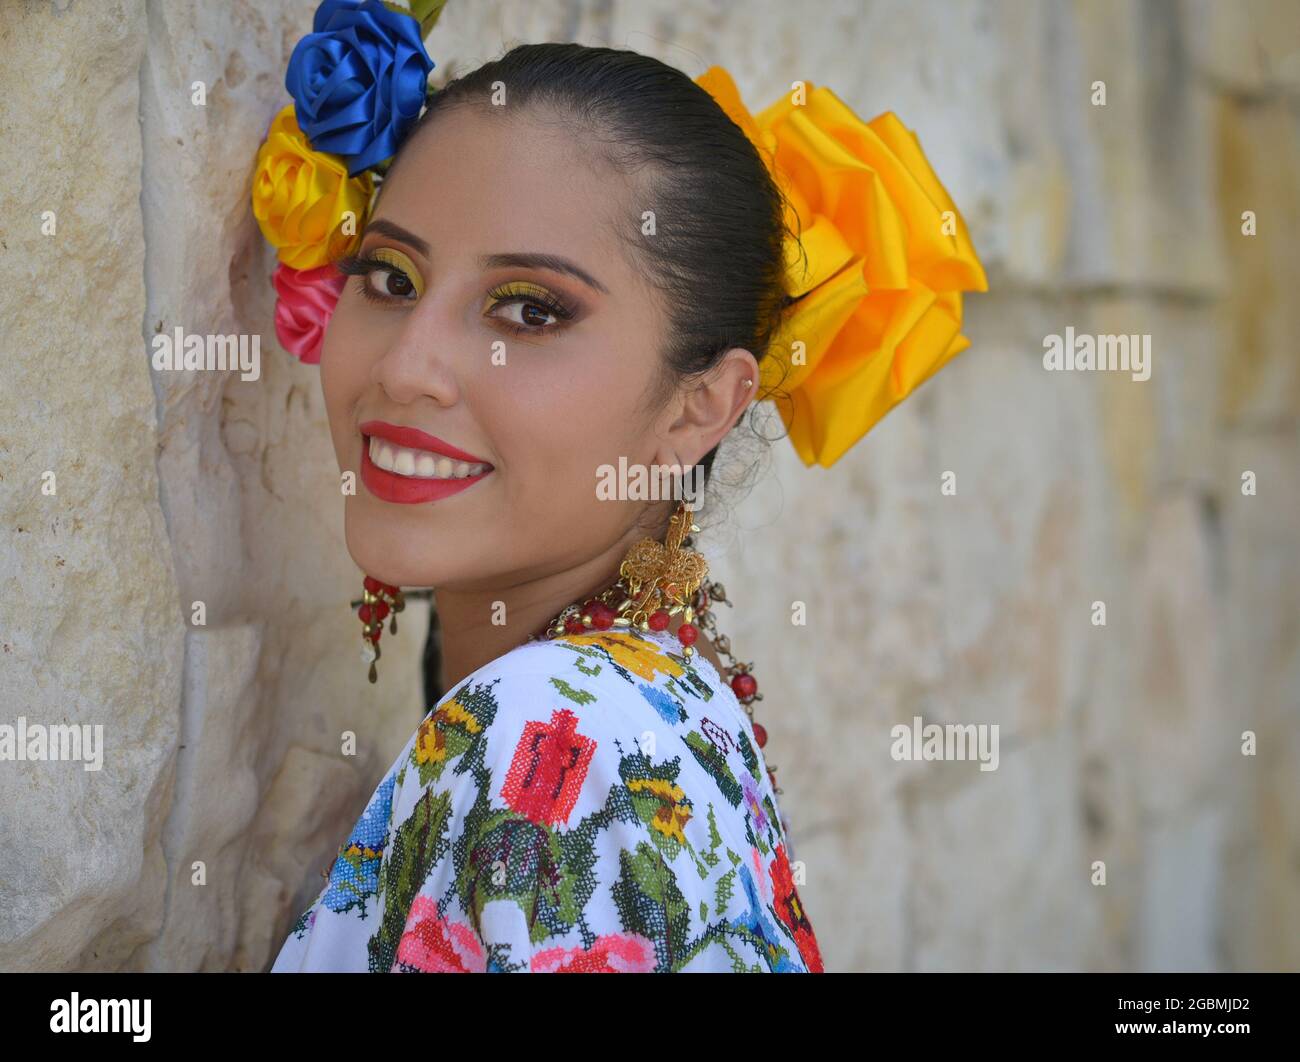 mexican girl with flowers in her hair